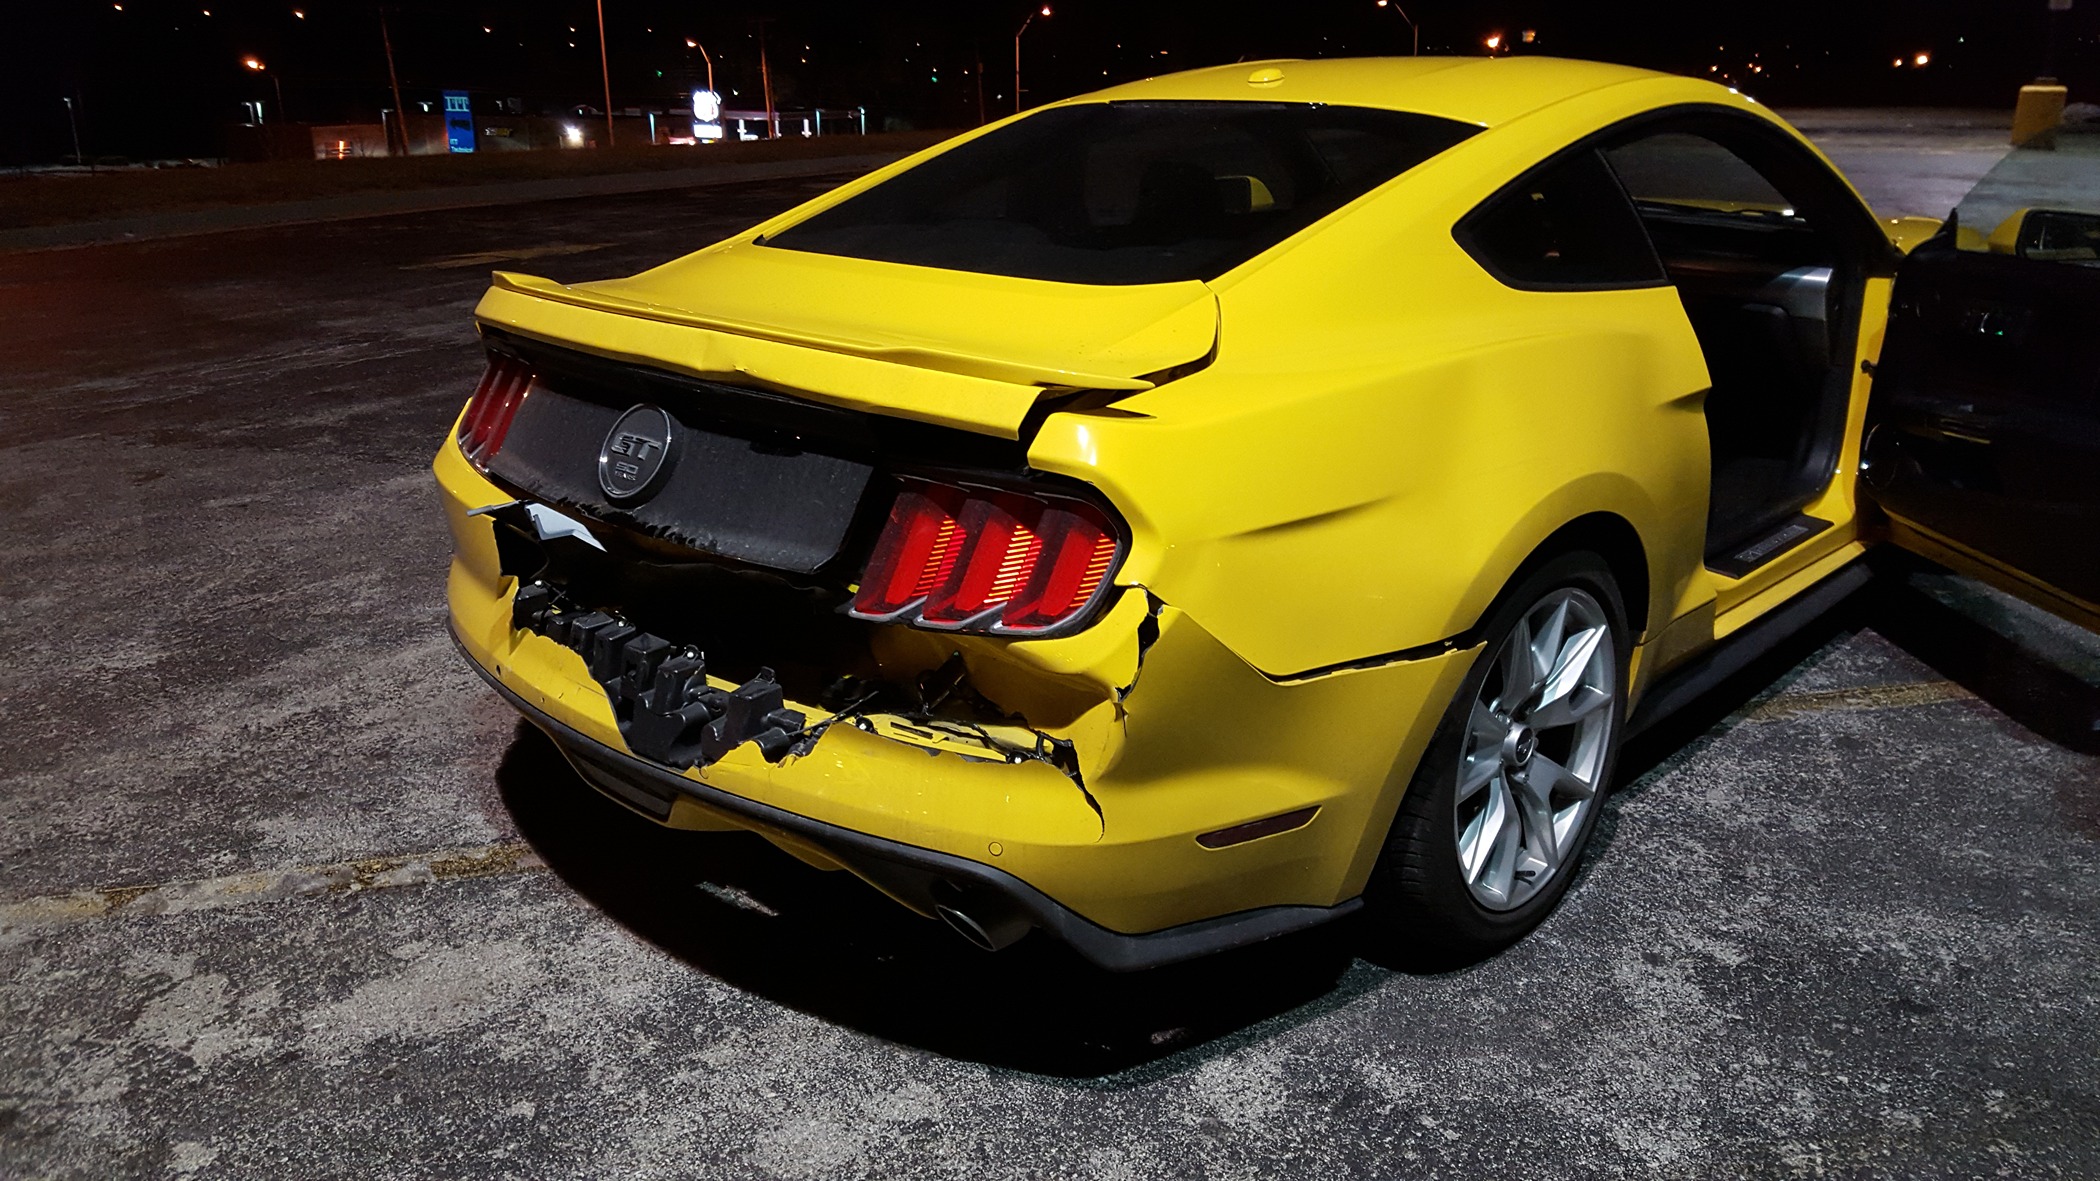 S650 Mustang Rear ended. Frame damage possible 20160113_063743